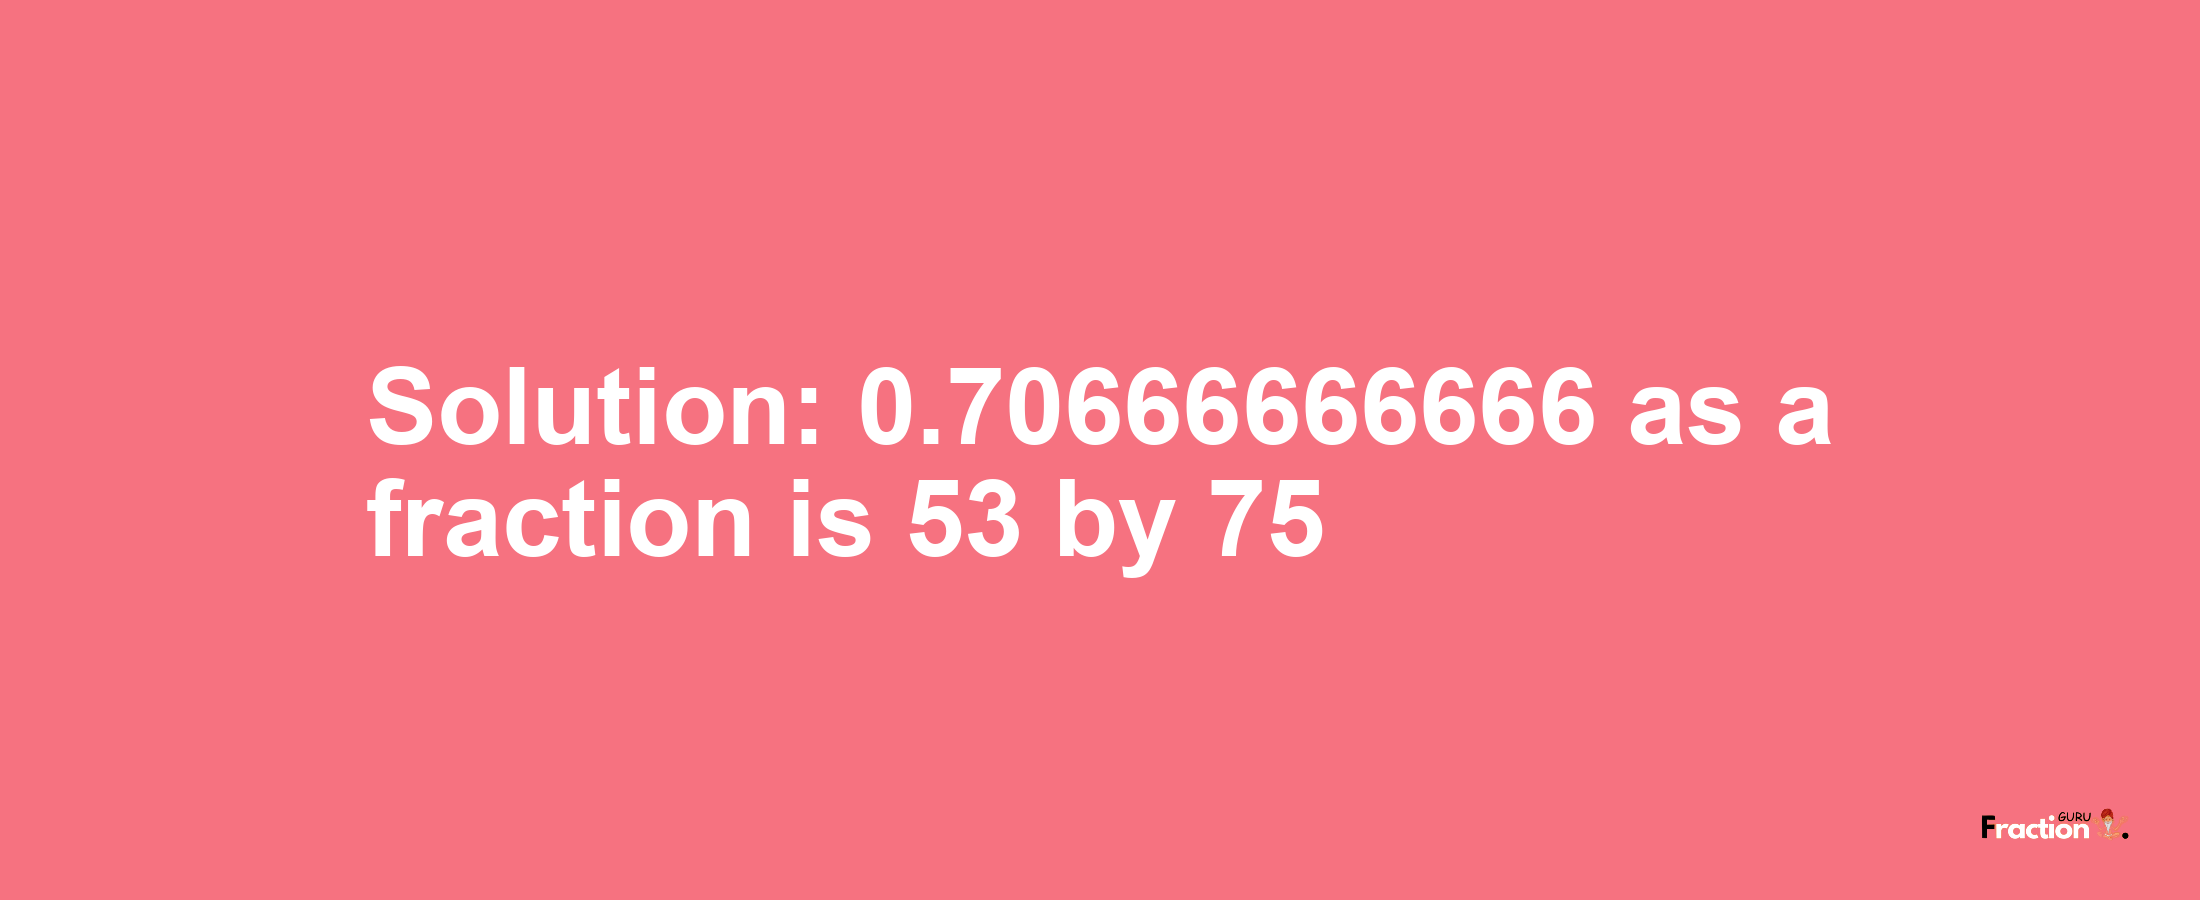 Solution:0.70666666666 as a fraction is 53/75